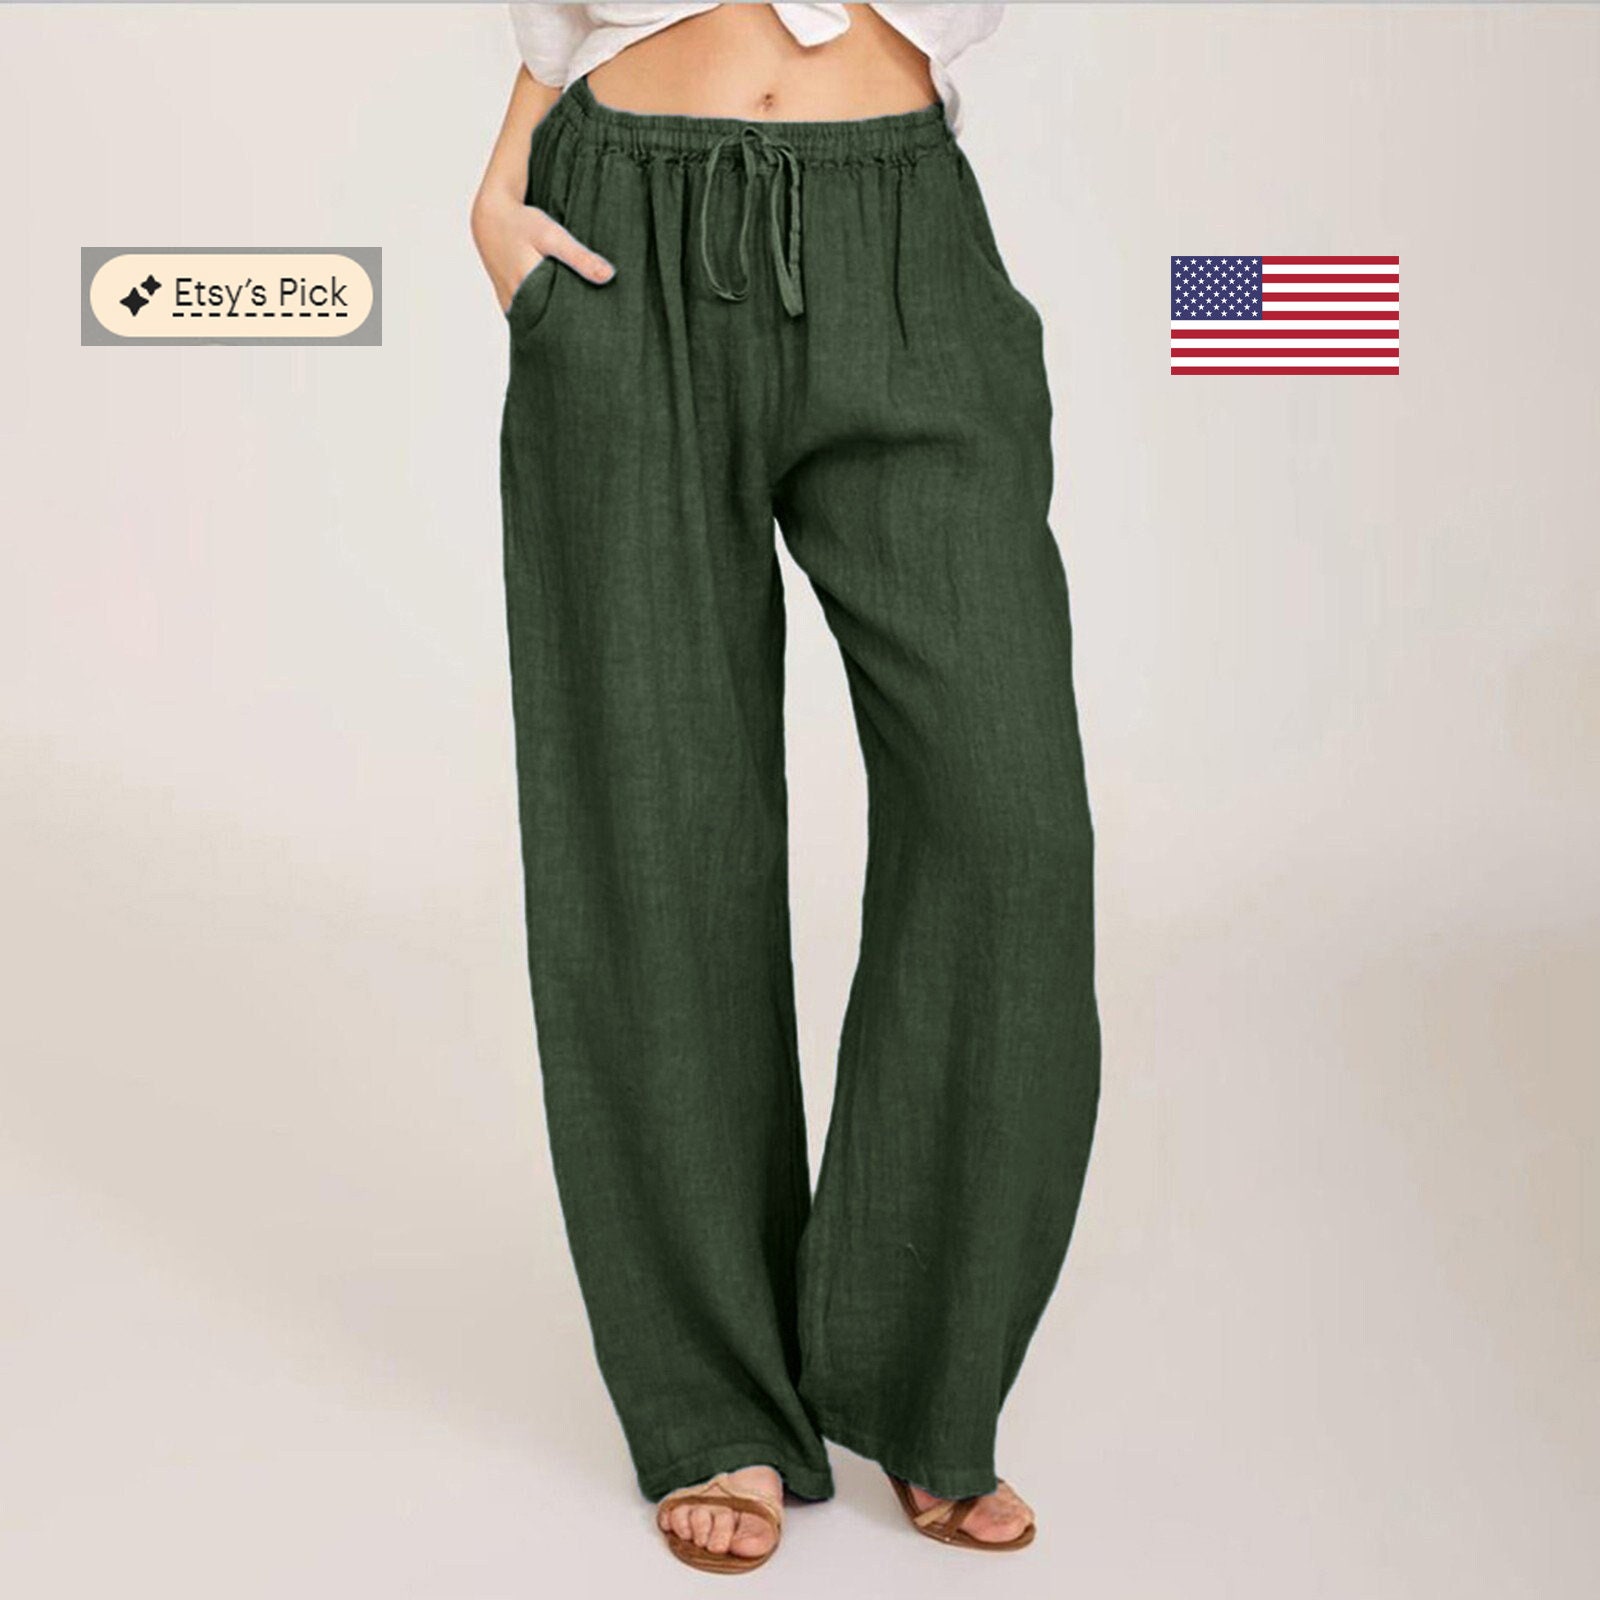 Loose Linen Pants ATHENS / Natural Loose Linen Pants / Washed Women Linen  Trousers / Slightly Tapered Linen Pants Available in 41 Colors 